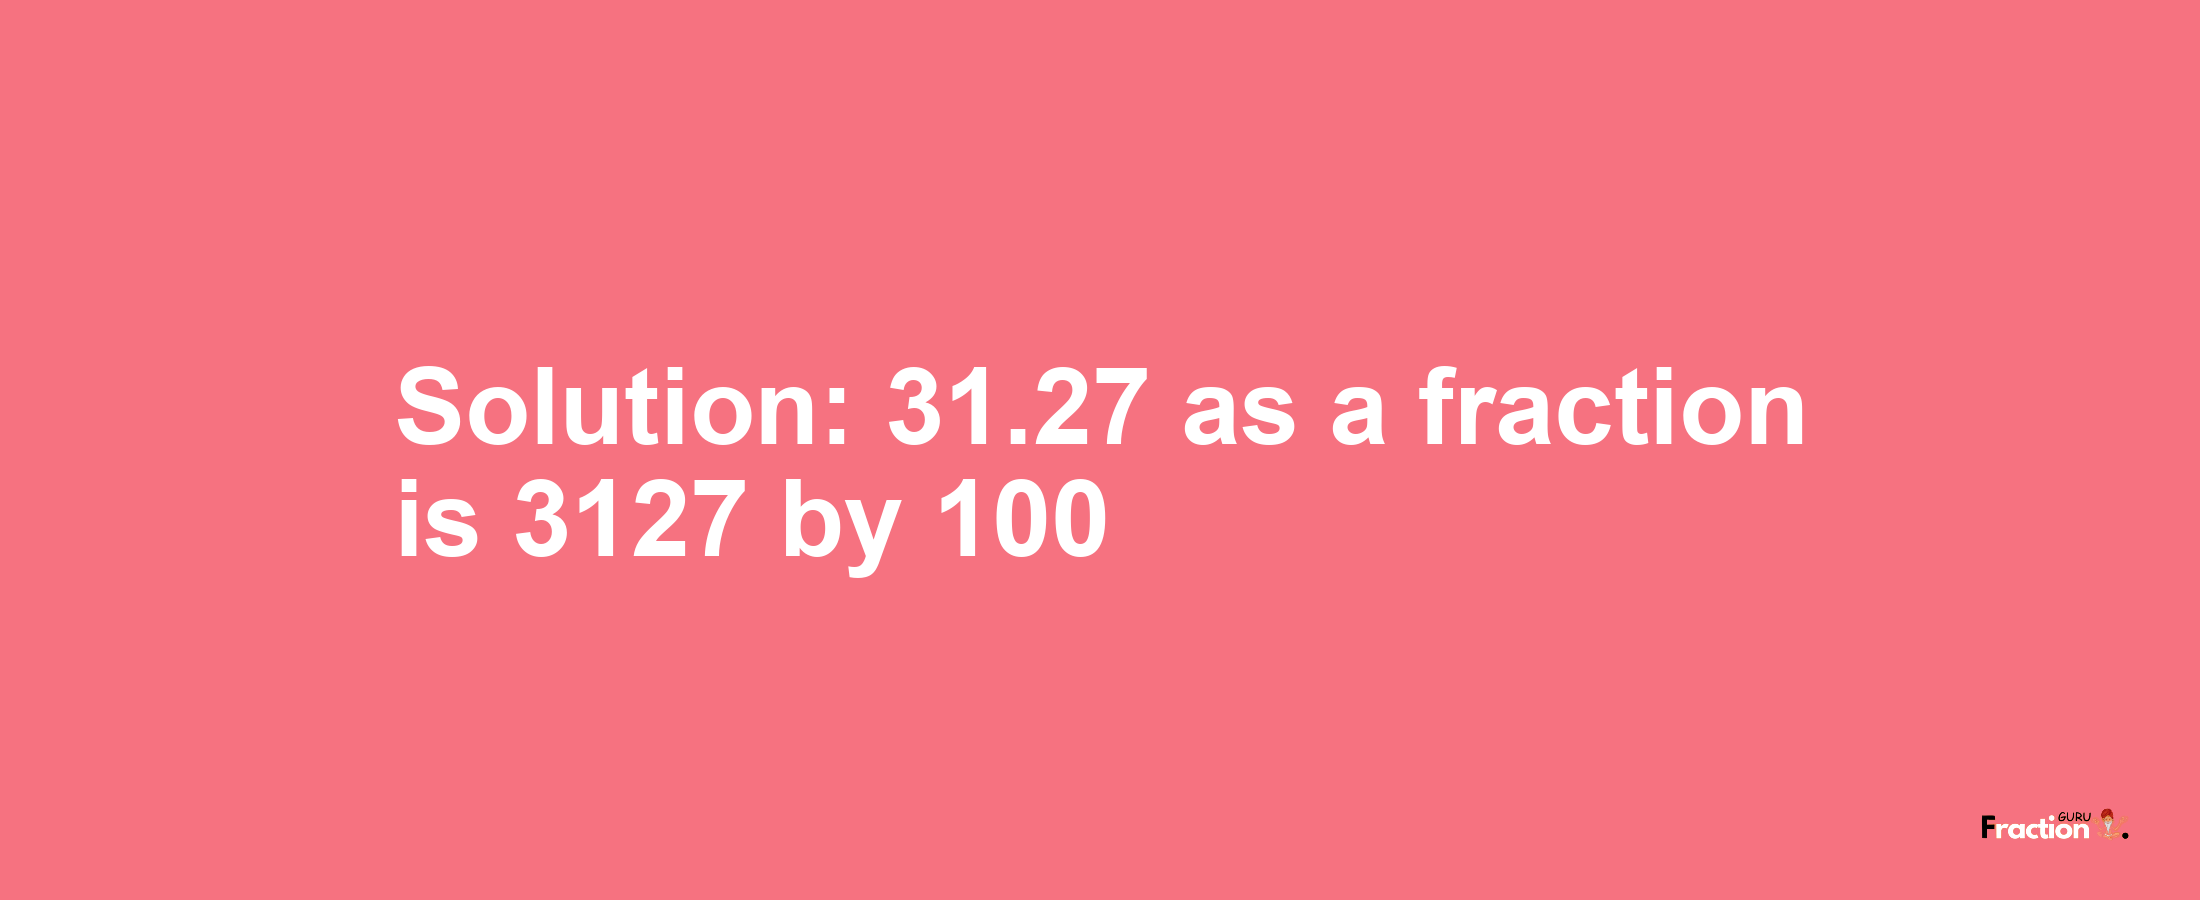 Solution:31.27 as a fraction is 3127/100